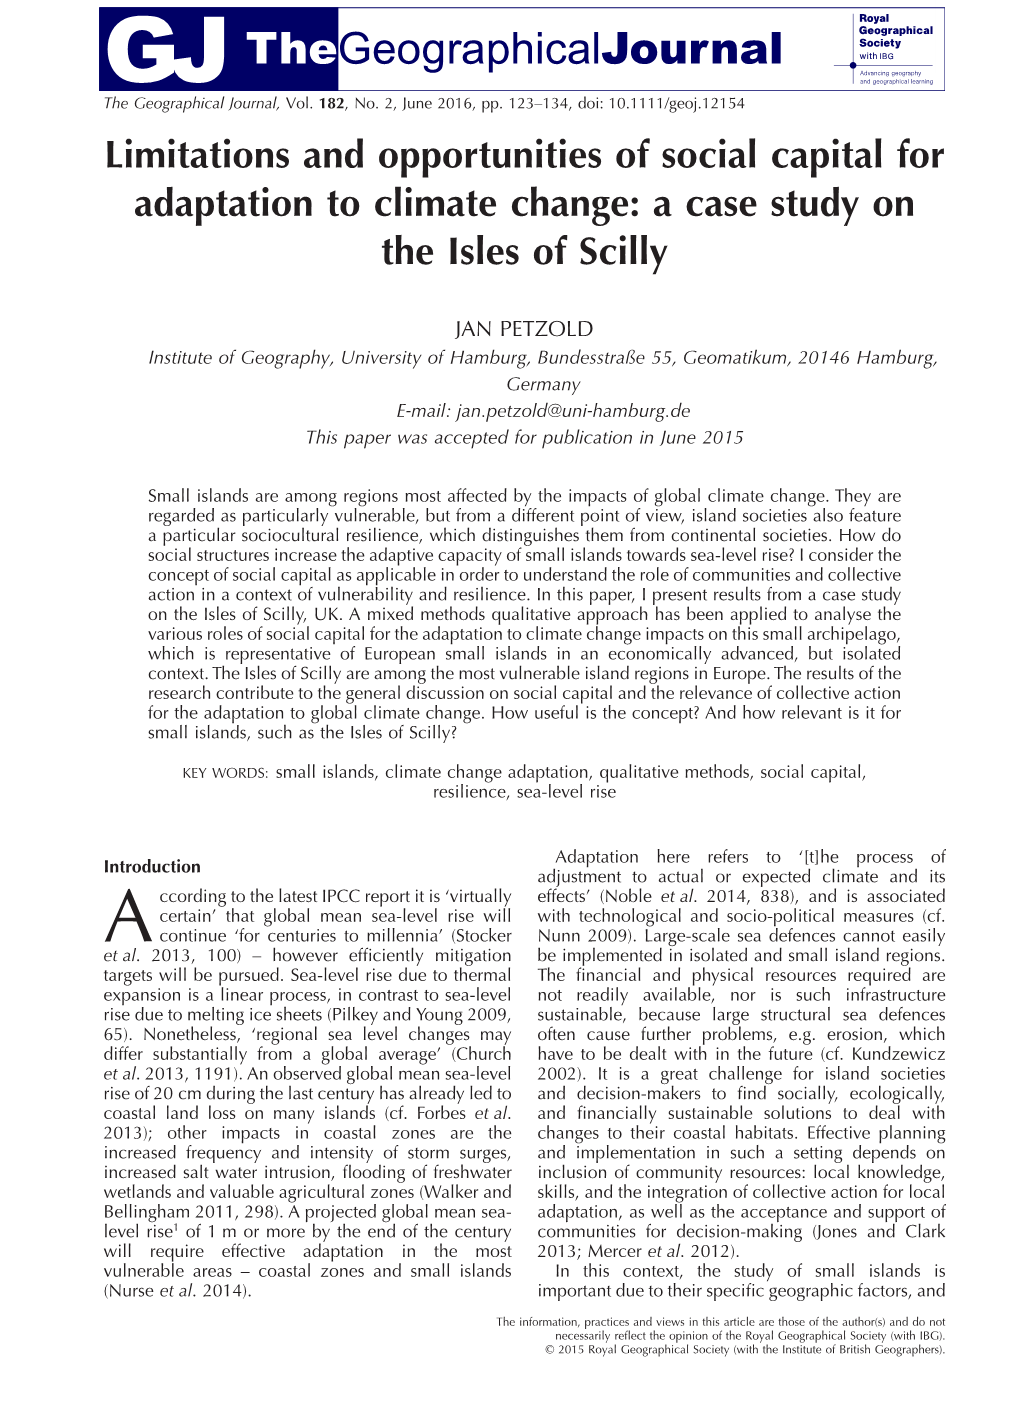 Limitations and Opportunities of Social Capital for Adaptation to Climate Change: a Case Study on the Isles of Scilly